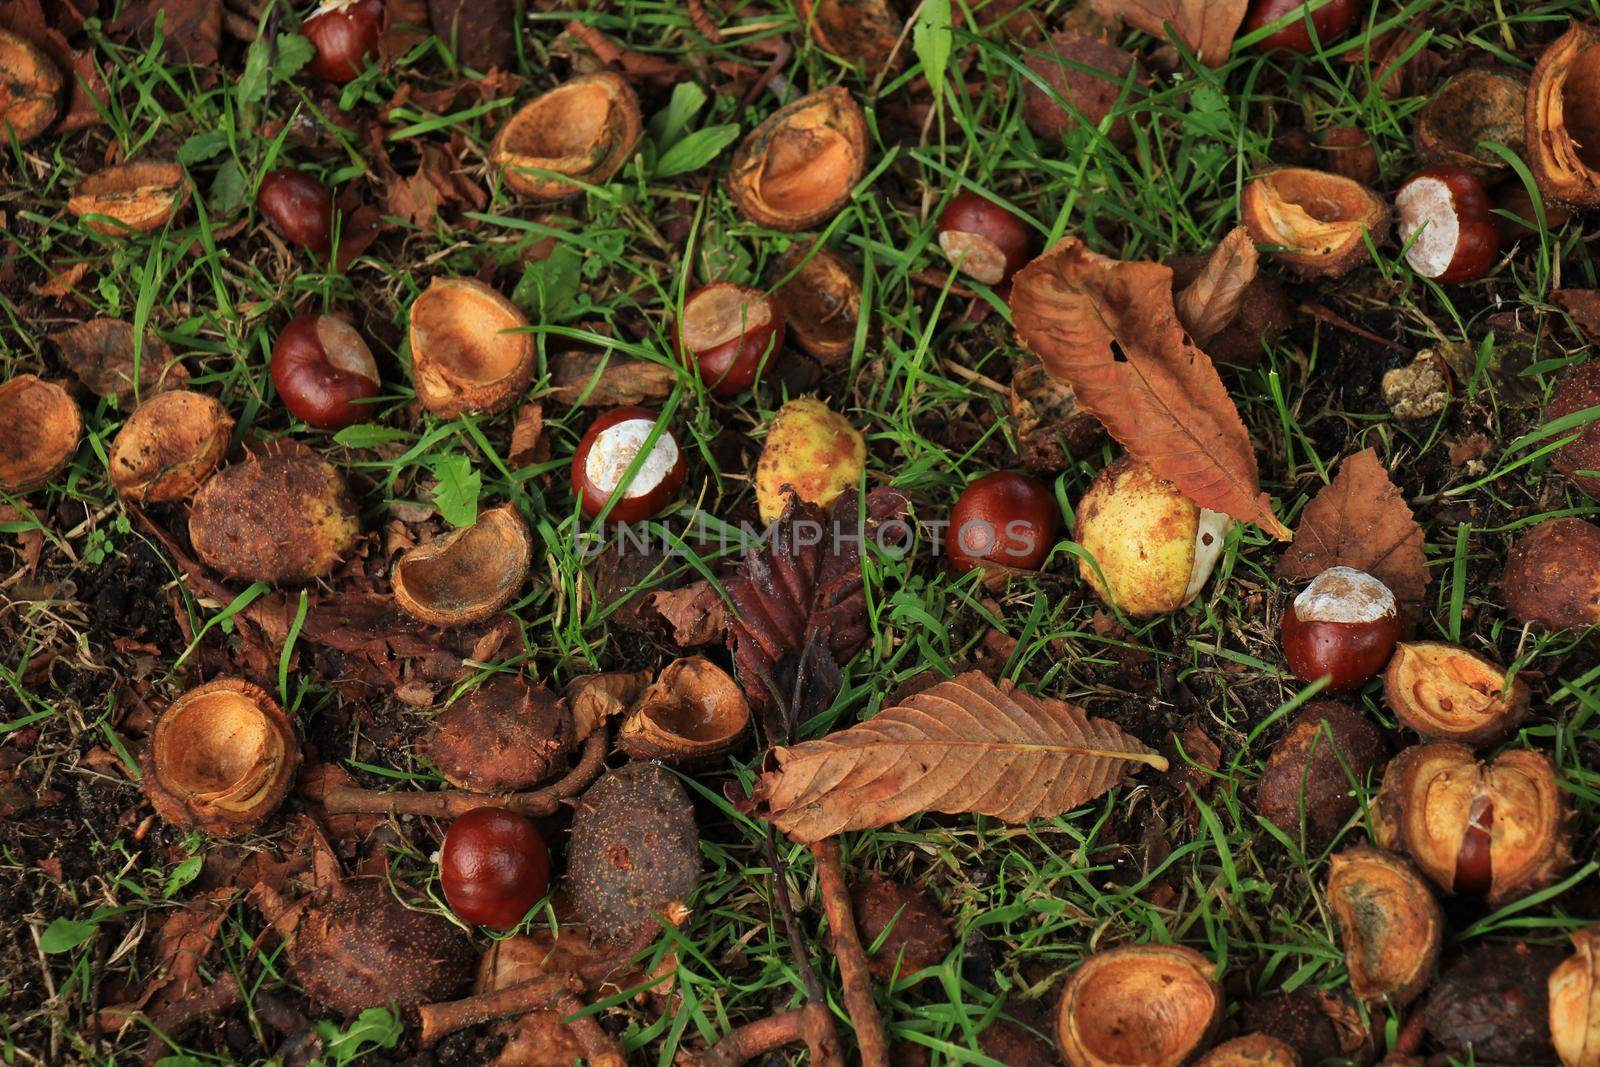 Chestnuts in the grass by studioportosabbia